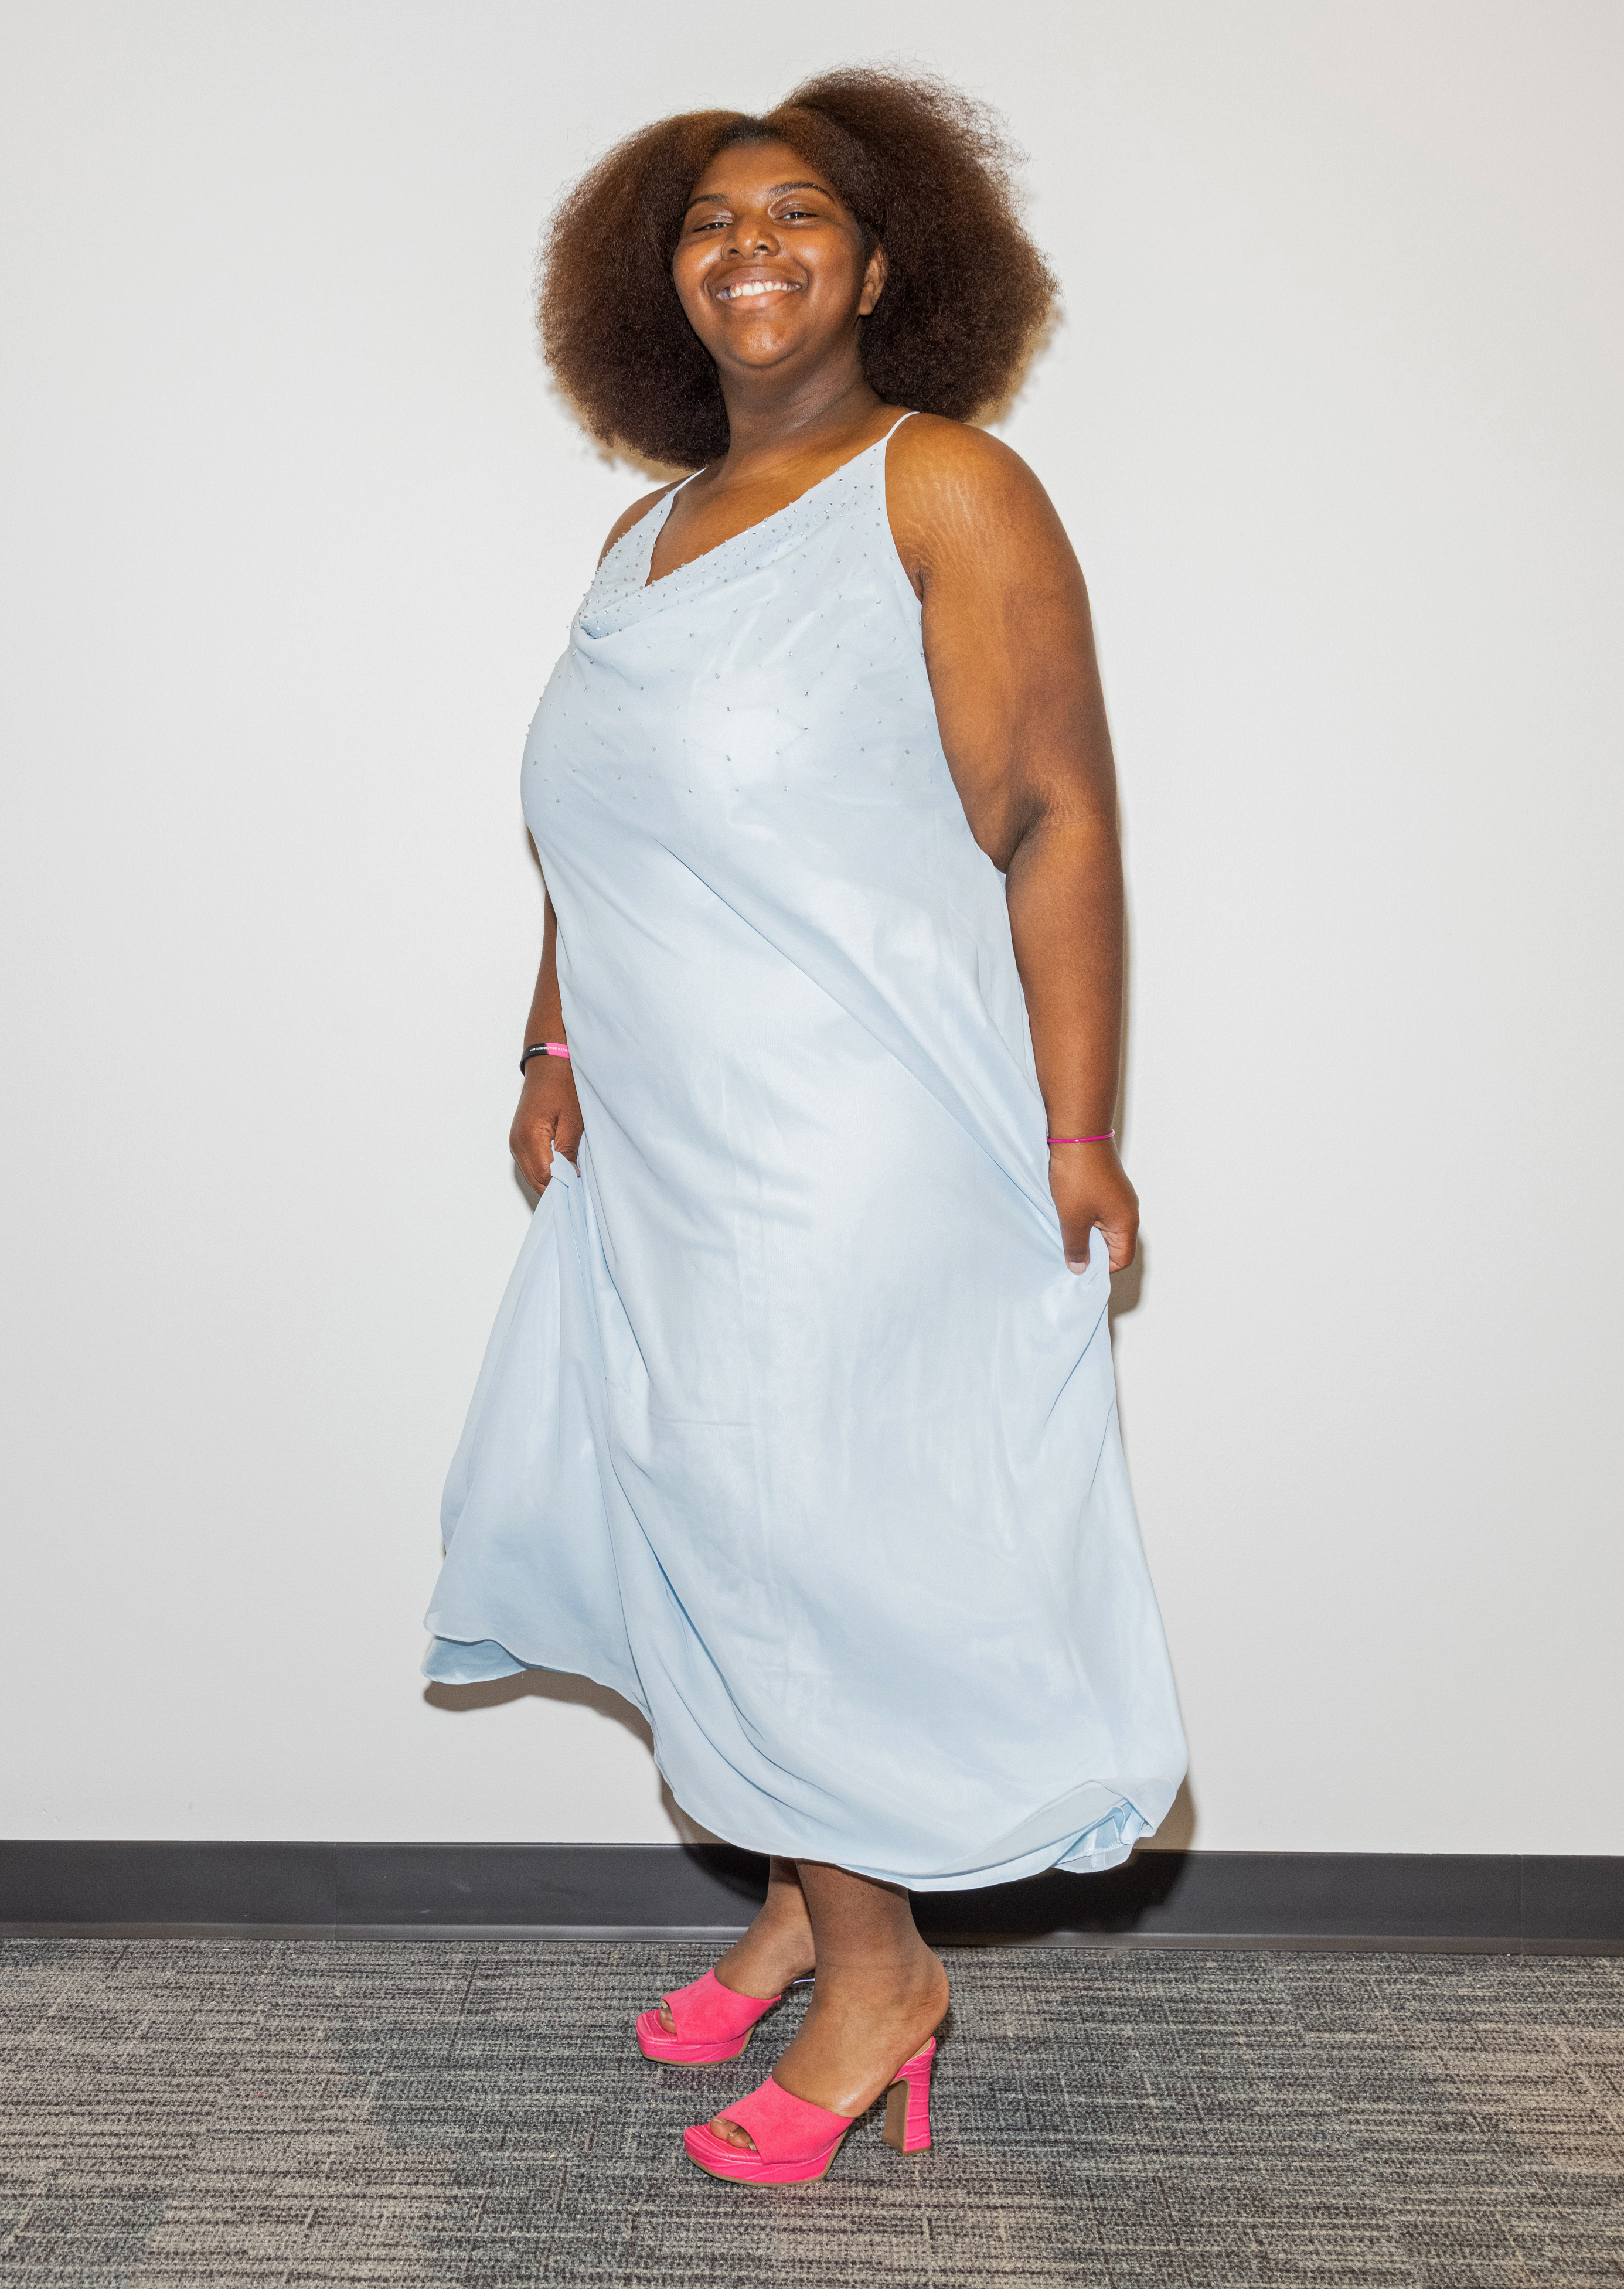 A smiling woman in a light blue dress and pink high heels, with her voluminous hair styled in an afro.